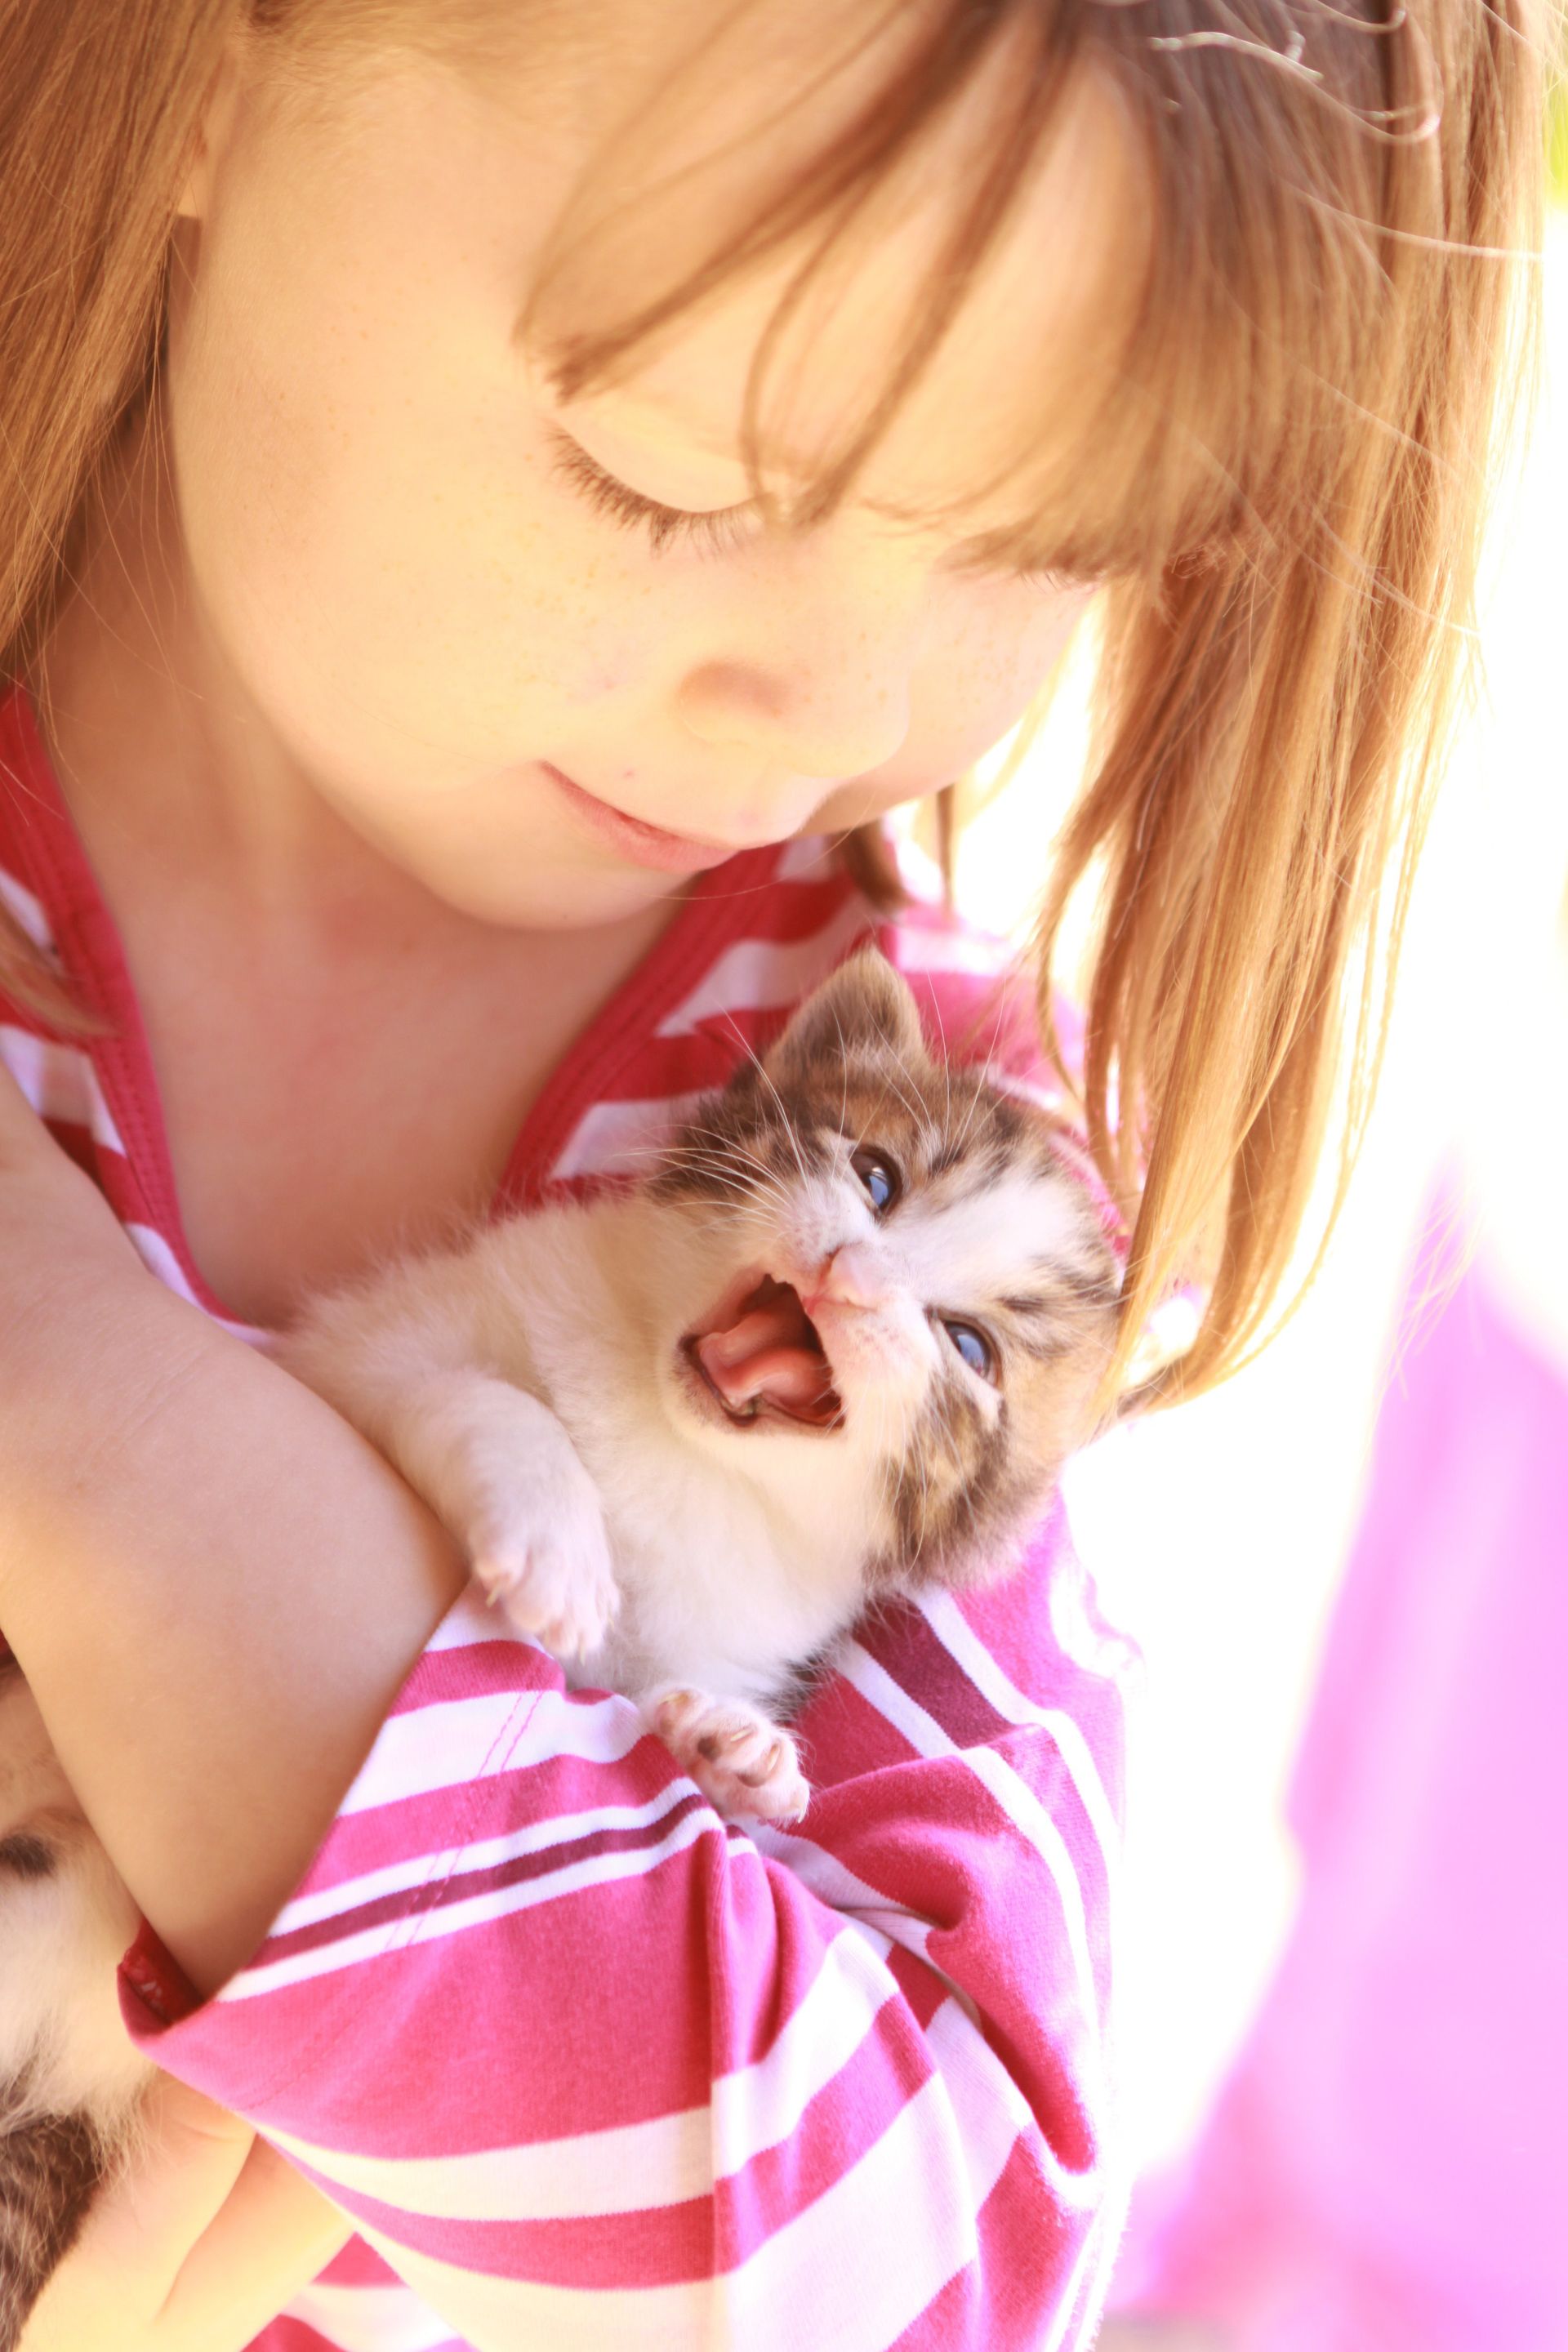 A young girl holding a kitten.